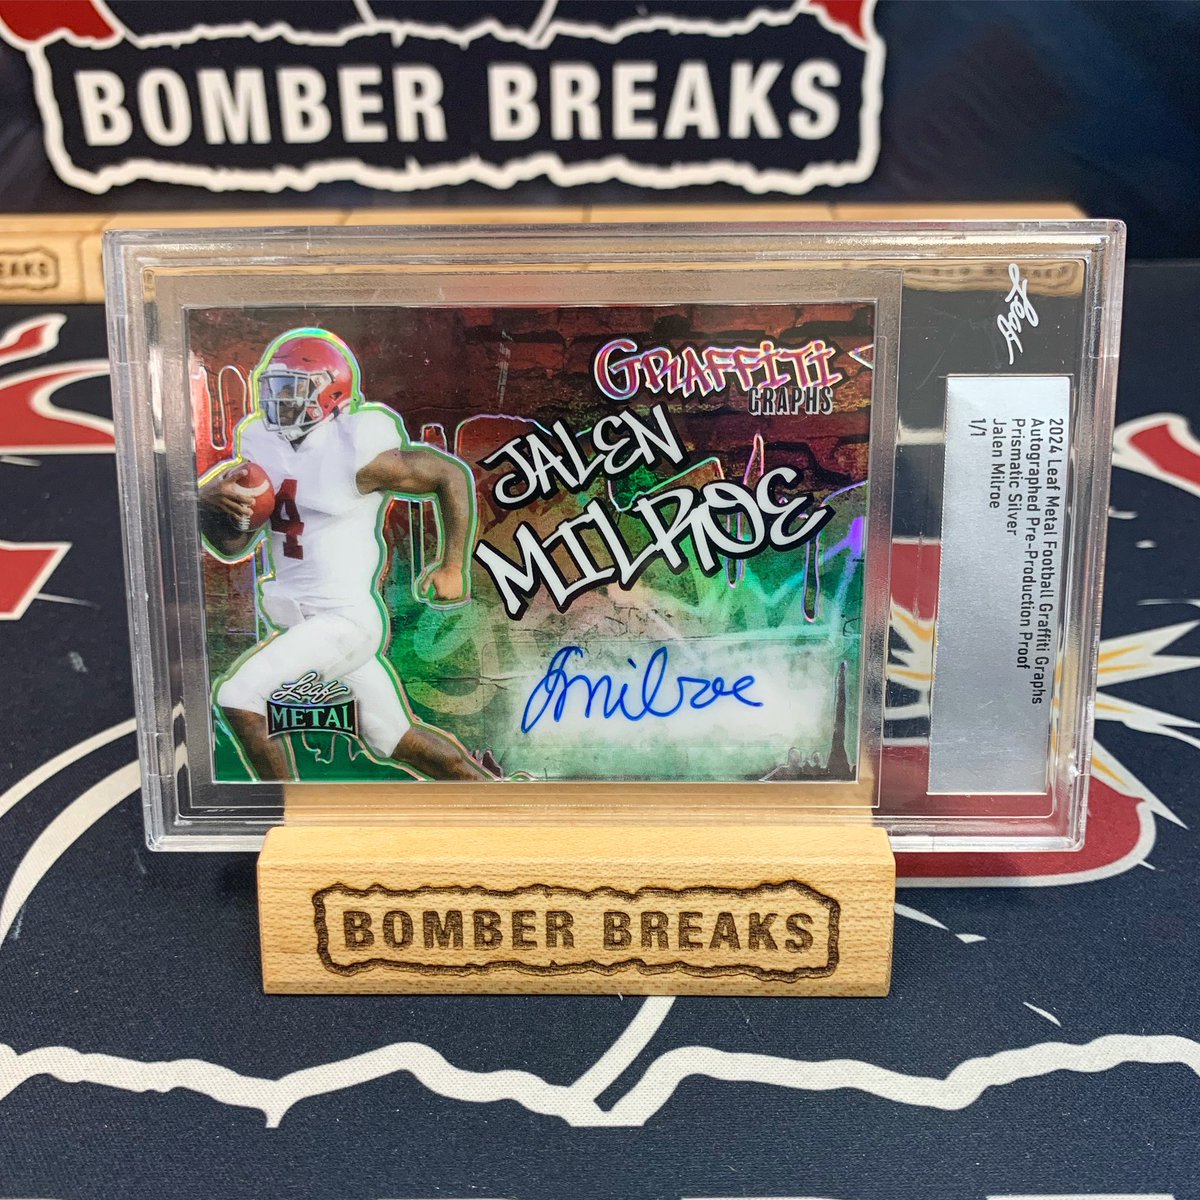 Roll Tide! 💥💥
Jalen Milroe 1/1 Graffiti Graphs Auto pulled this week in our @Leaf_Cards Metal Football breaks!
@JalenMilroe #footballcards #alabama #rolltide #bama #groupbreaks #boxbreaks #casebreaks #thehobby #jalenmilroe #ncaa #nfl #oneofone #1of1 #autograph